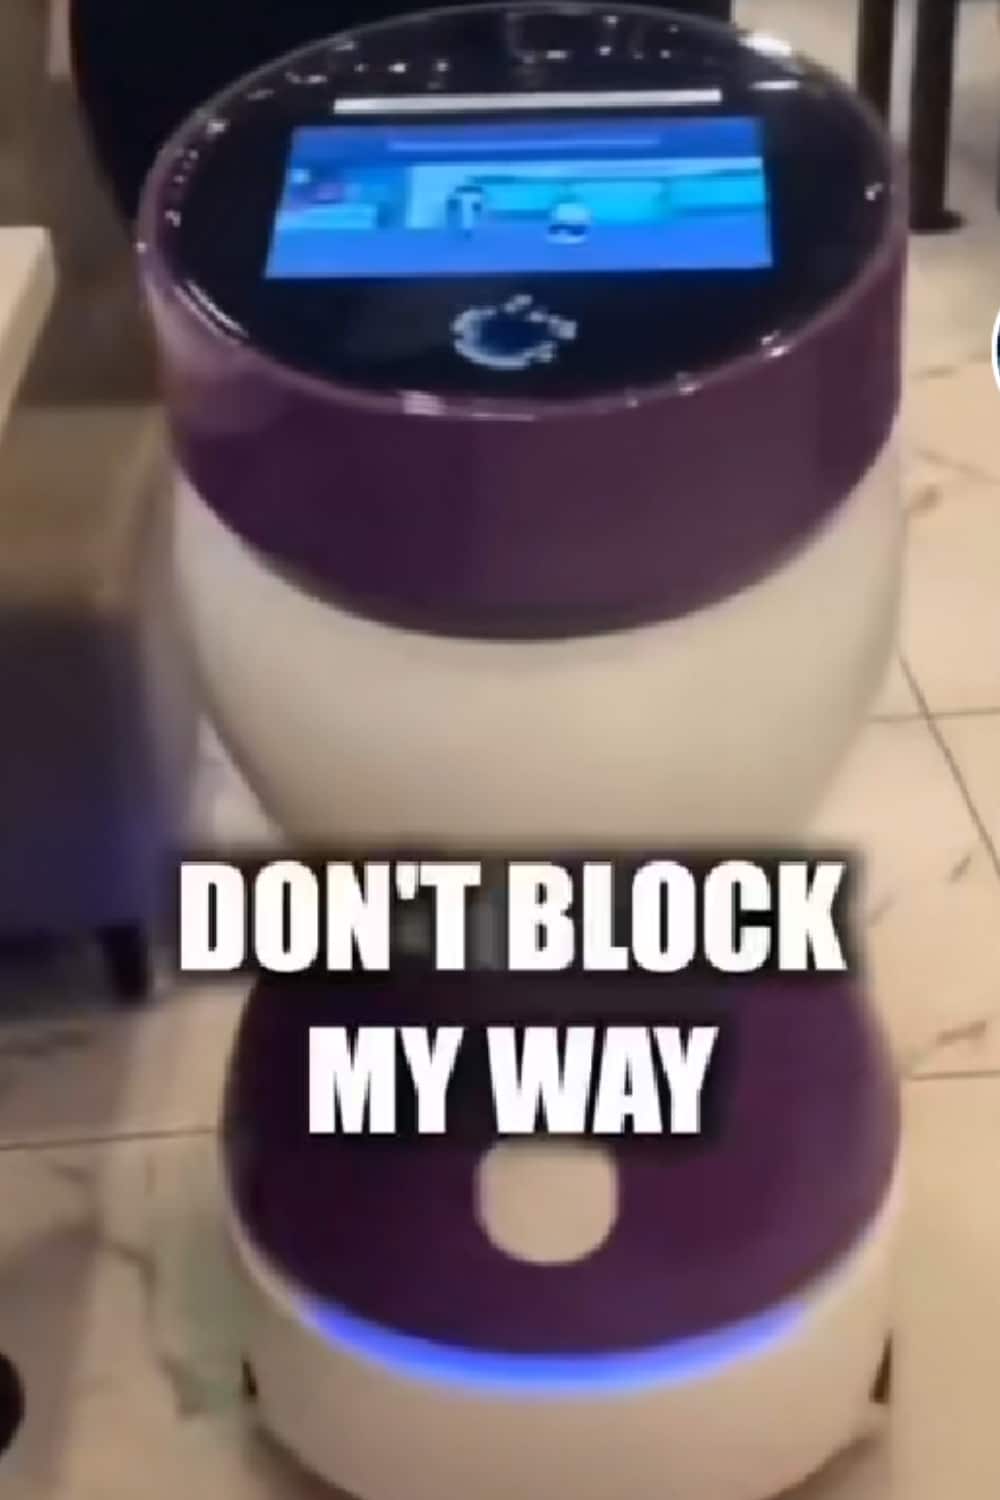 "I will be sacked" - Robot waiter gets angry at customer who blocks its way (Video)